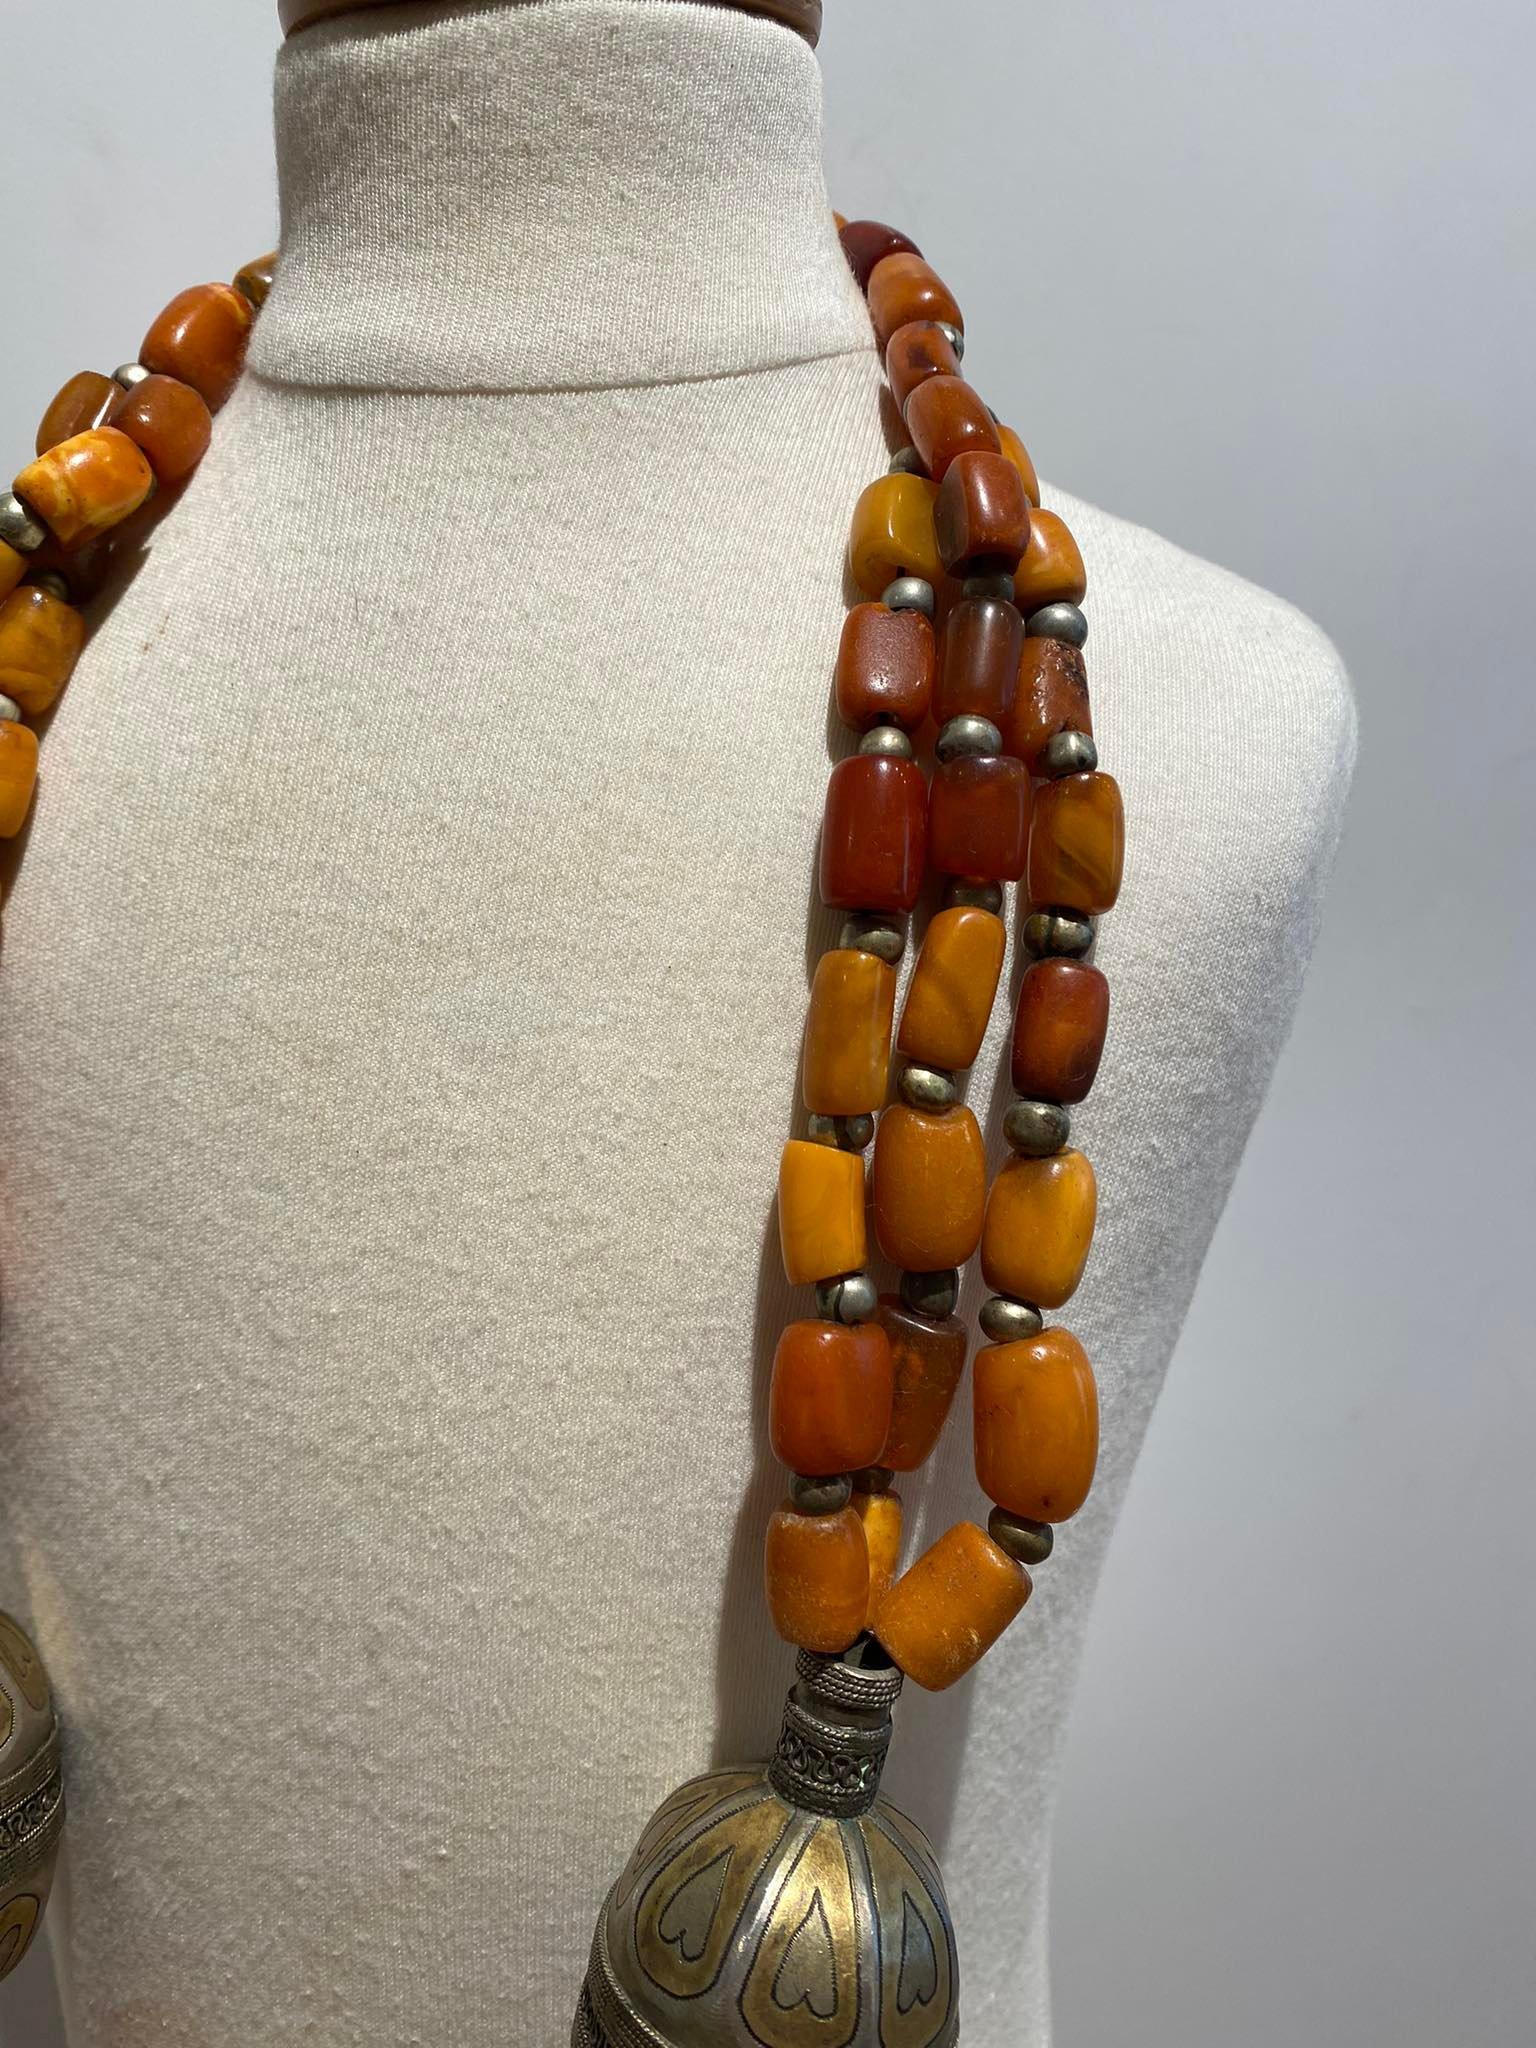  Antique Amber Necklace Yemen Afghanistan 18/19th Century Islamic Art silver  For Sale 1